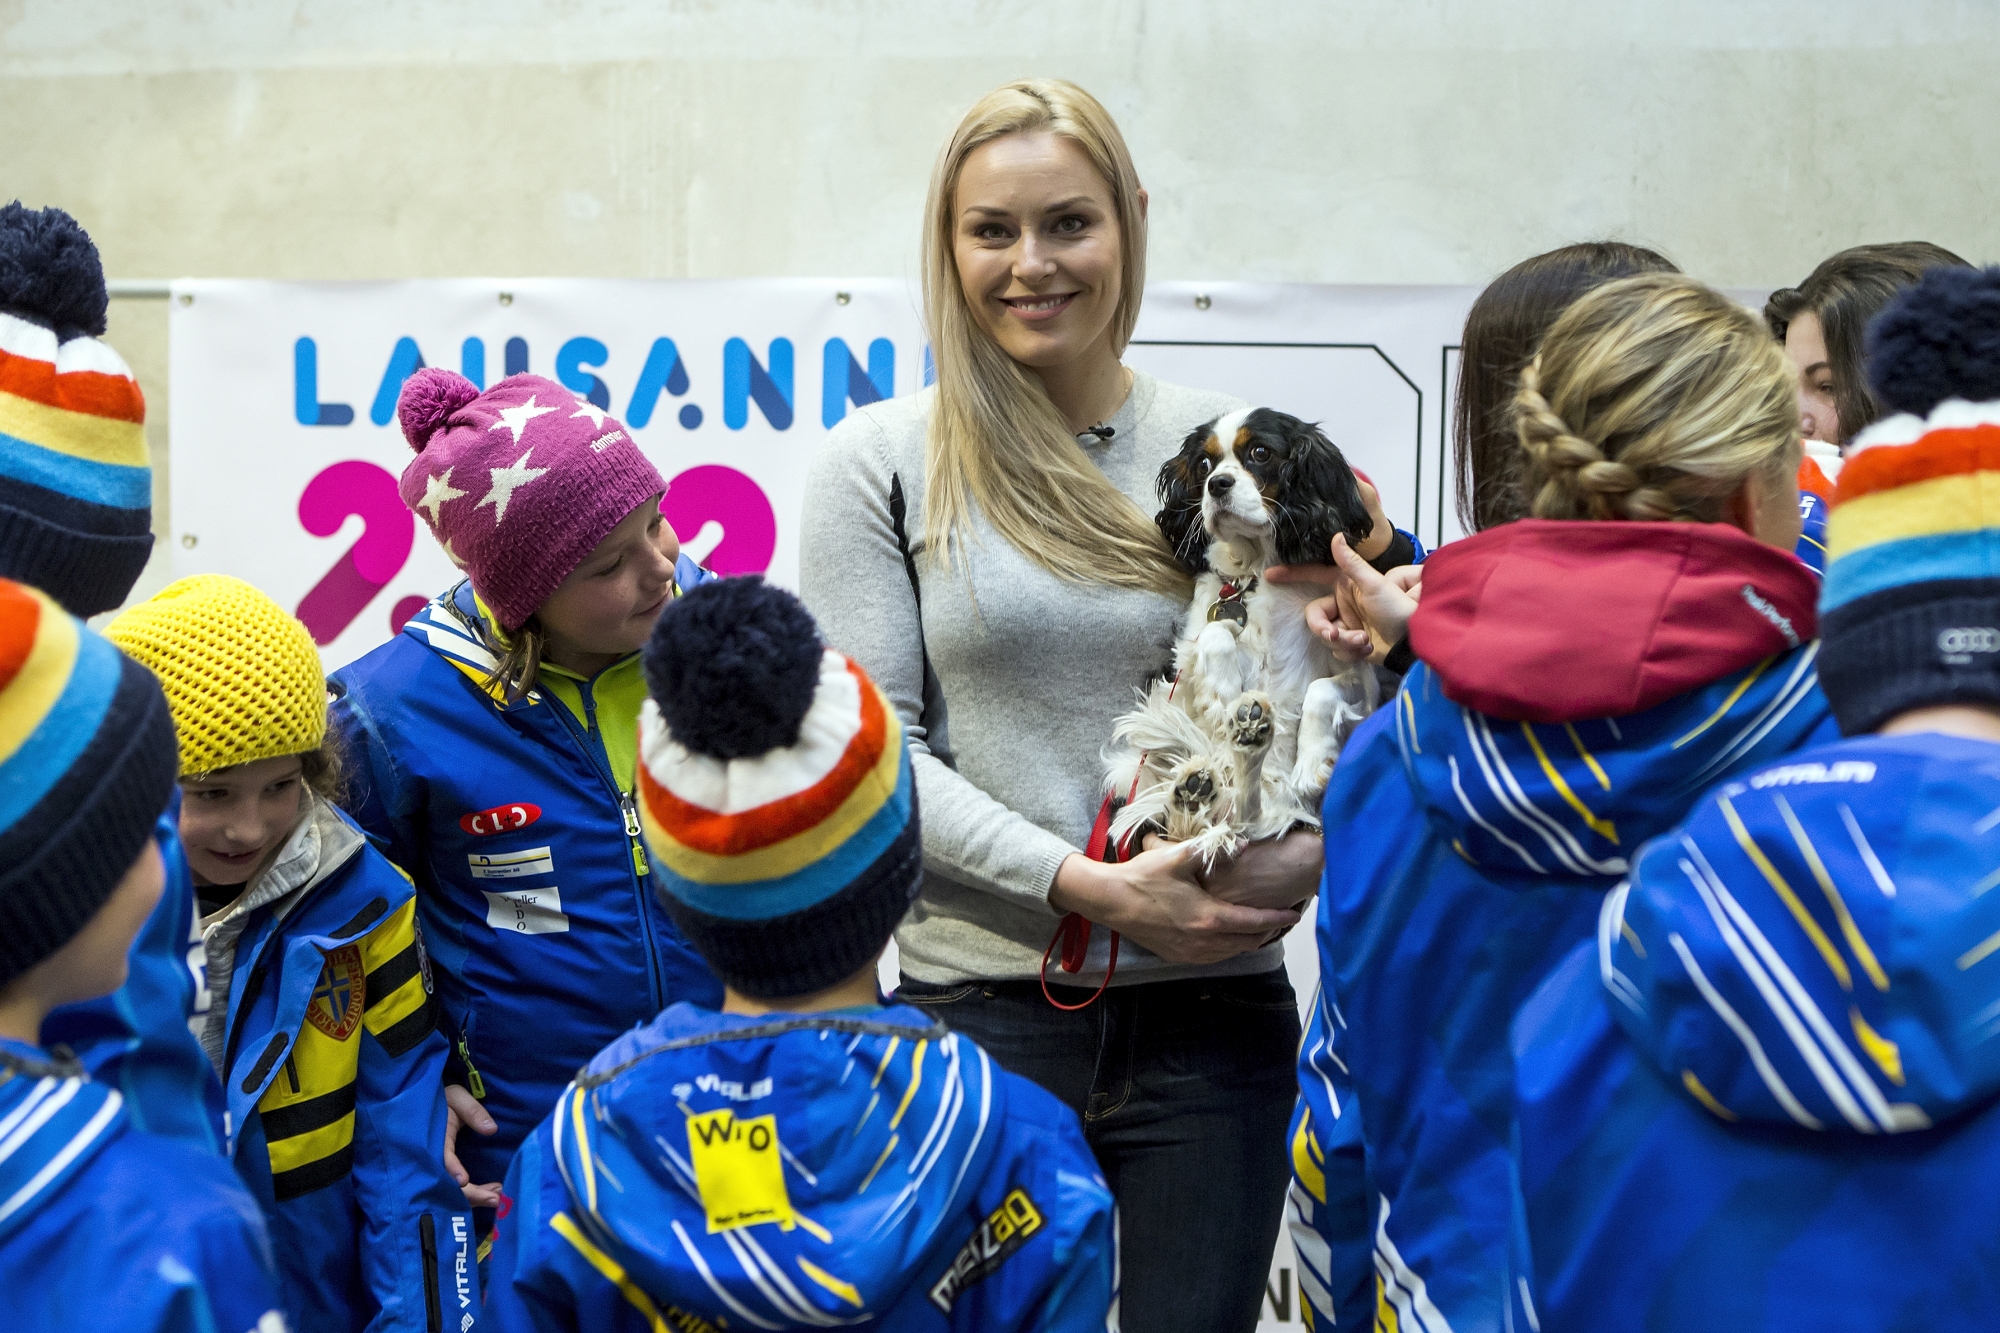 Ski racer Lindsey Vonn from the United States, center, Ambassador for the Winter Youth Olympic Games Lausanne 2020, together with her dog Lucy, poses with kids of the skiing club Alpina, during a press conference in St. Moritz, Switzerland, on Sunday, December 10, 2017. (KEYSTONE/Alexandra Wey)